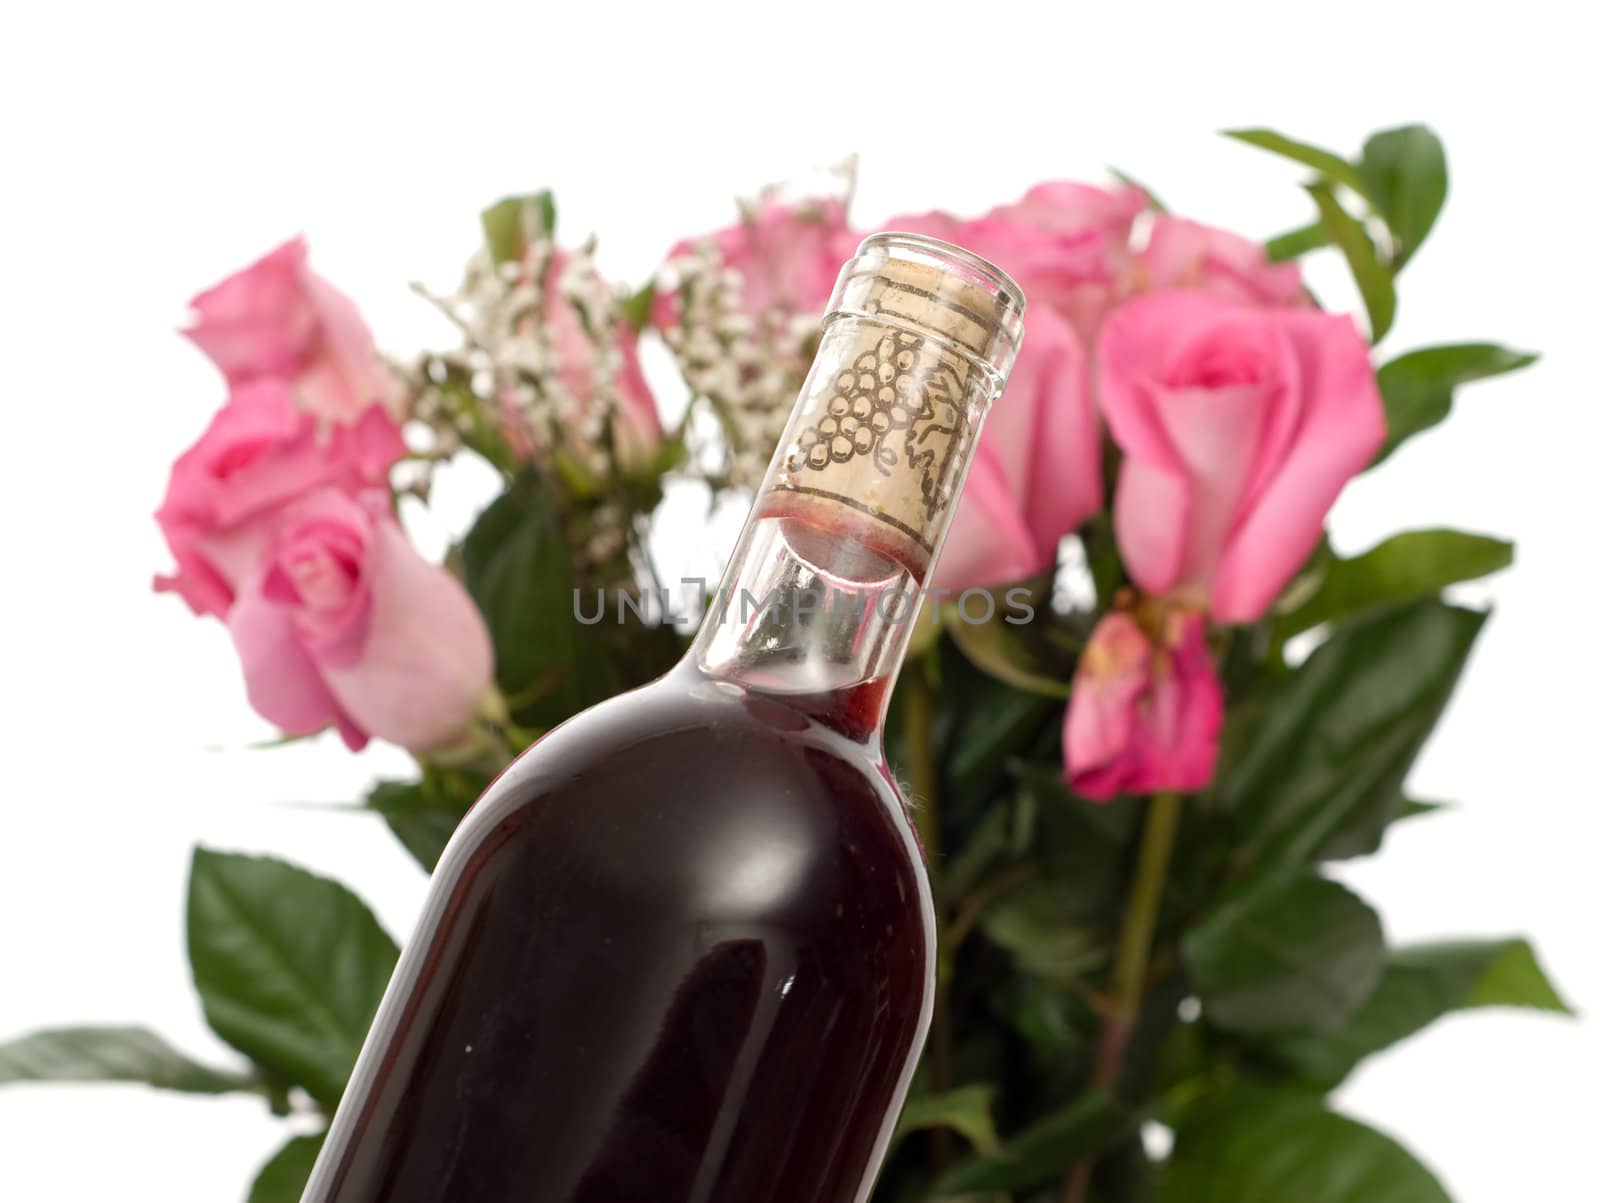 Closeup view of a bottle of champagne and some roses, isolated against a white background